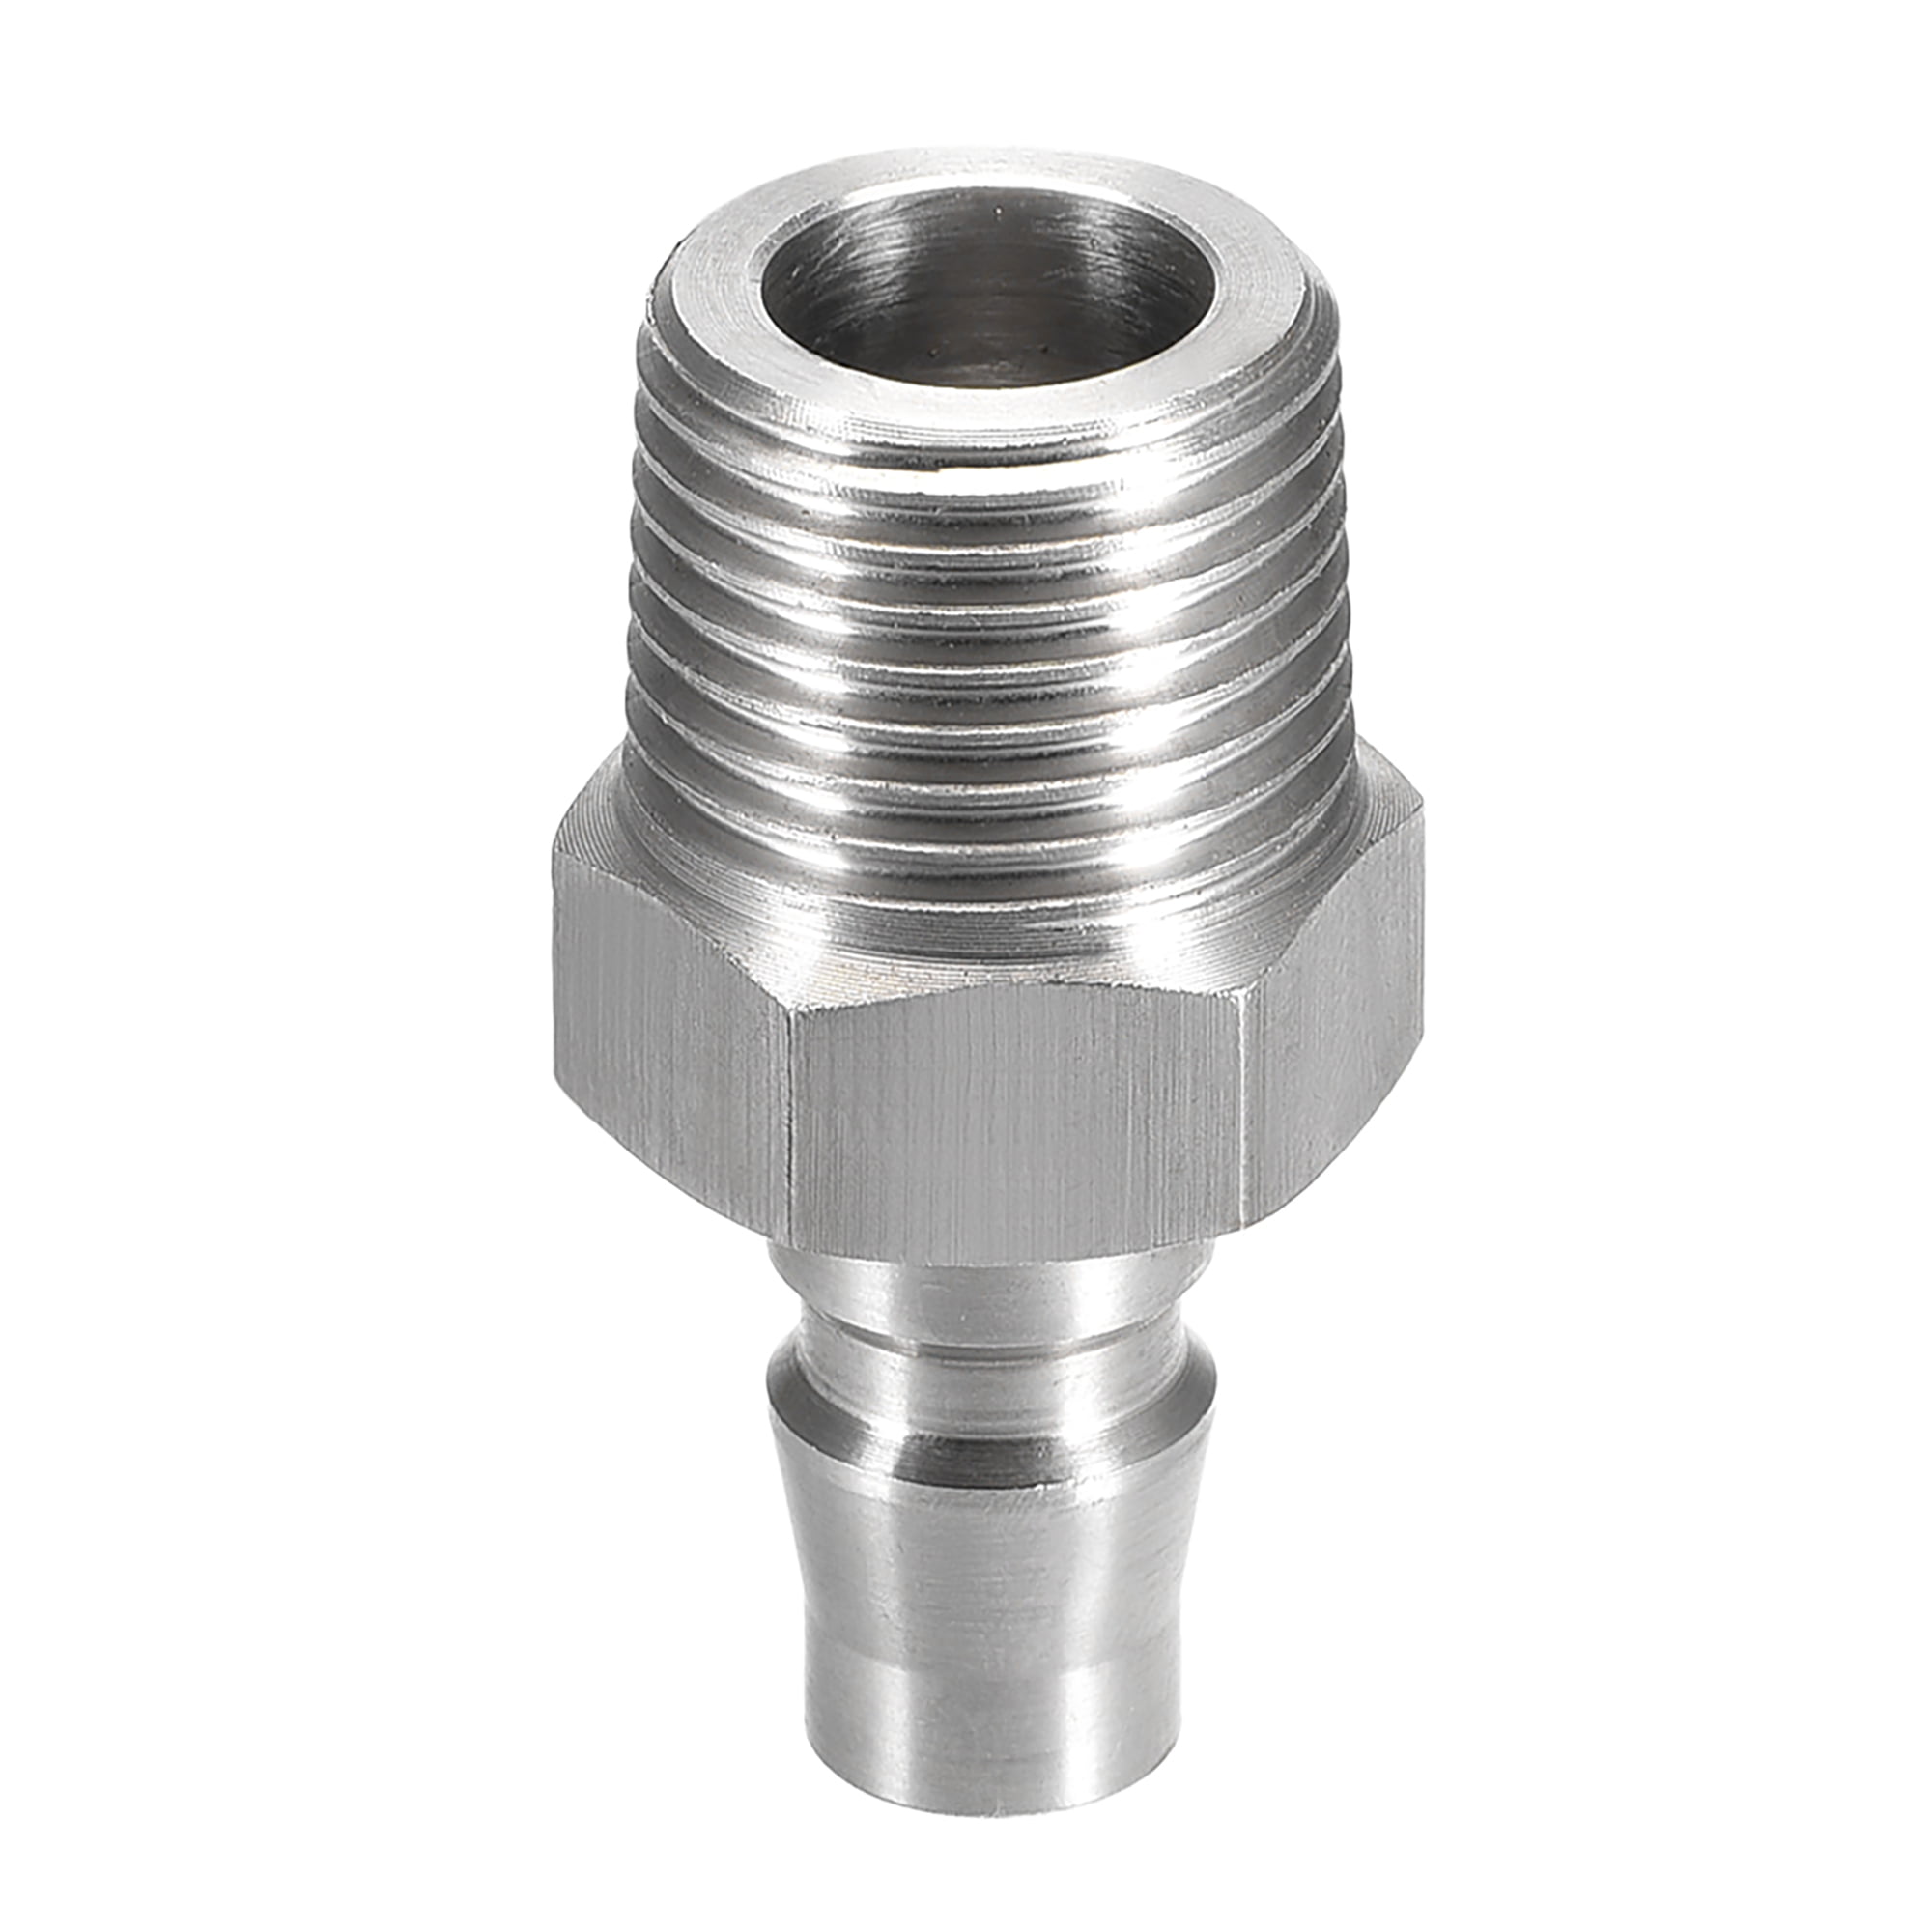 1/2-inch Dia Male Thread Quick Fitting Pneumatic Connector Coupler Silver Tone